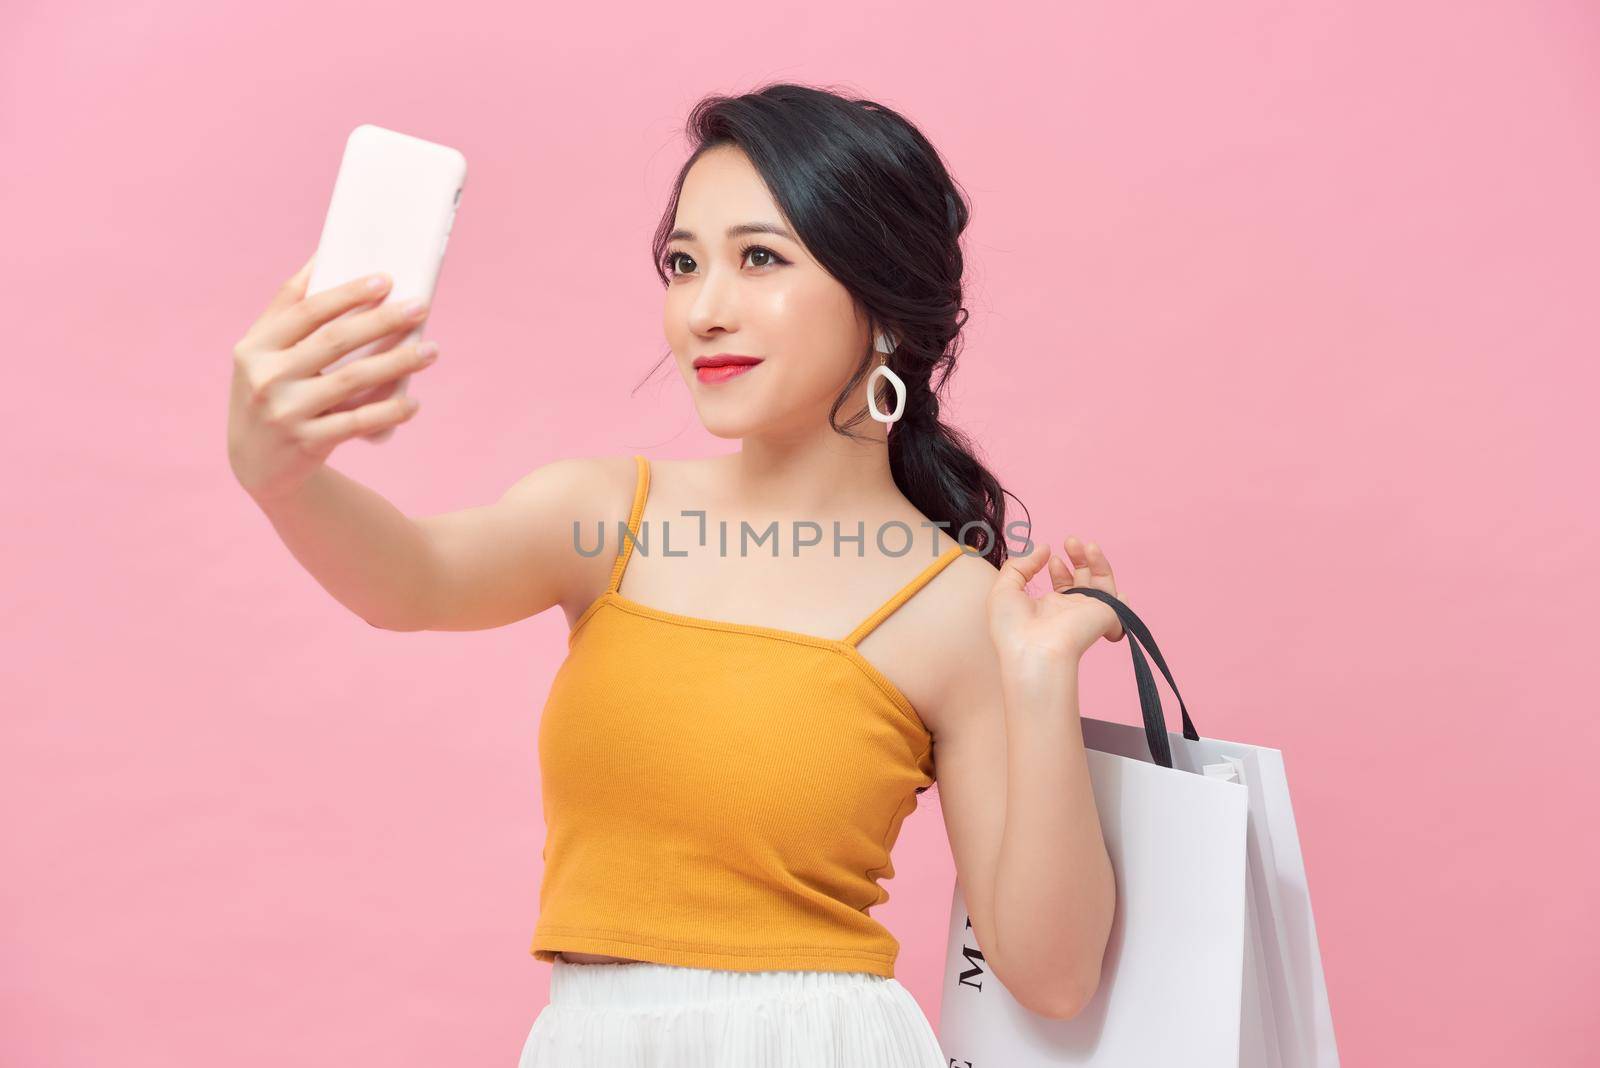 Attractive young Asian woman selfie while holding shopping bag over pink background.